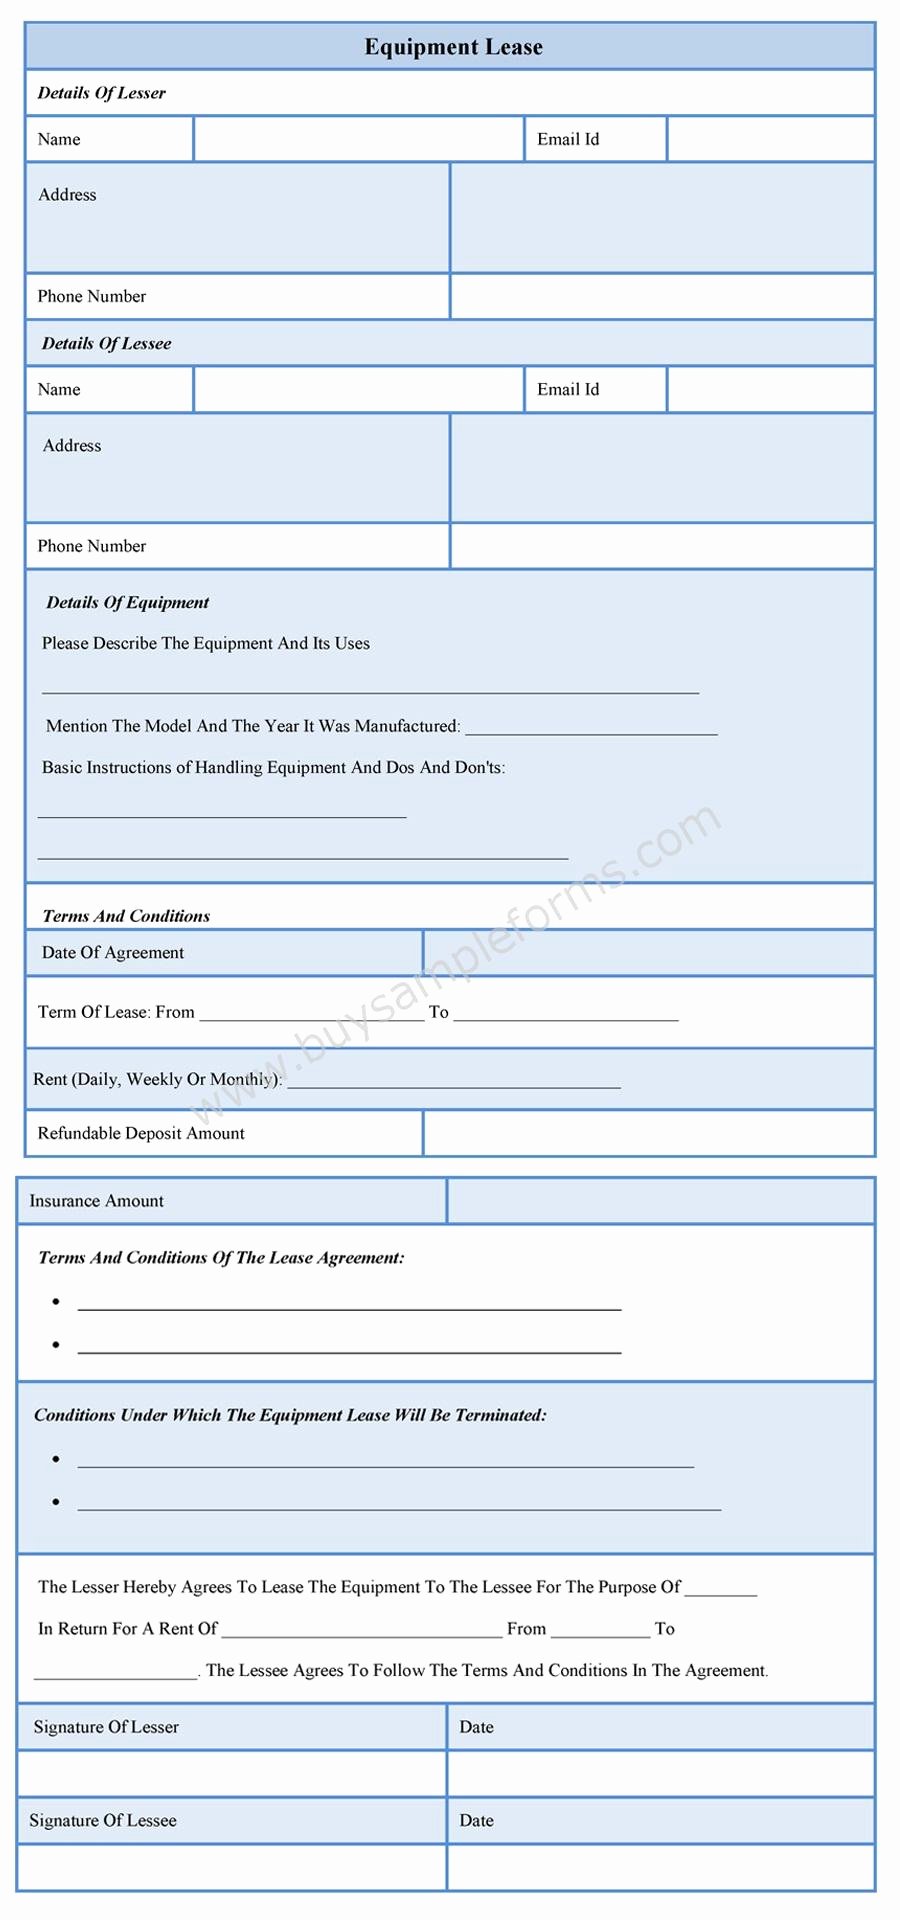 Equipment Lease form